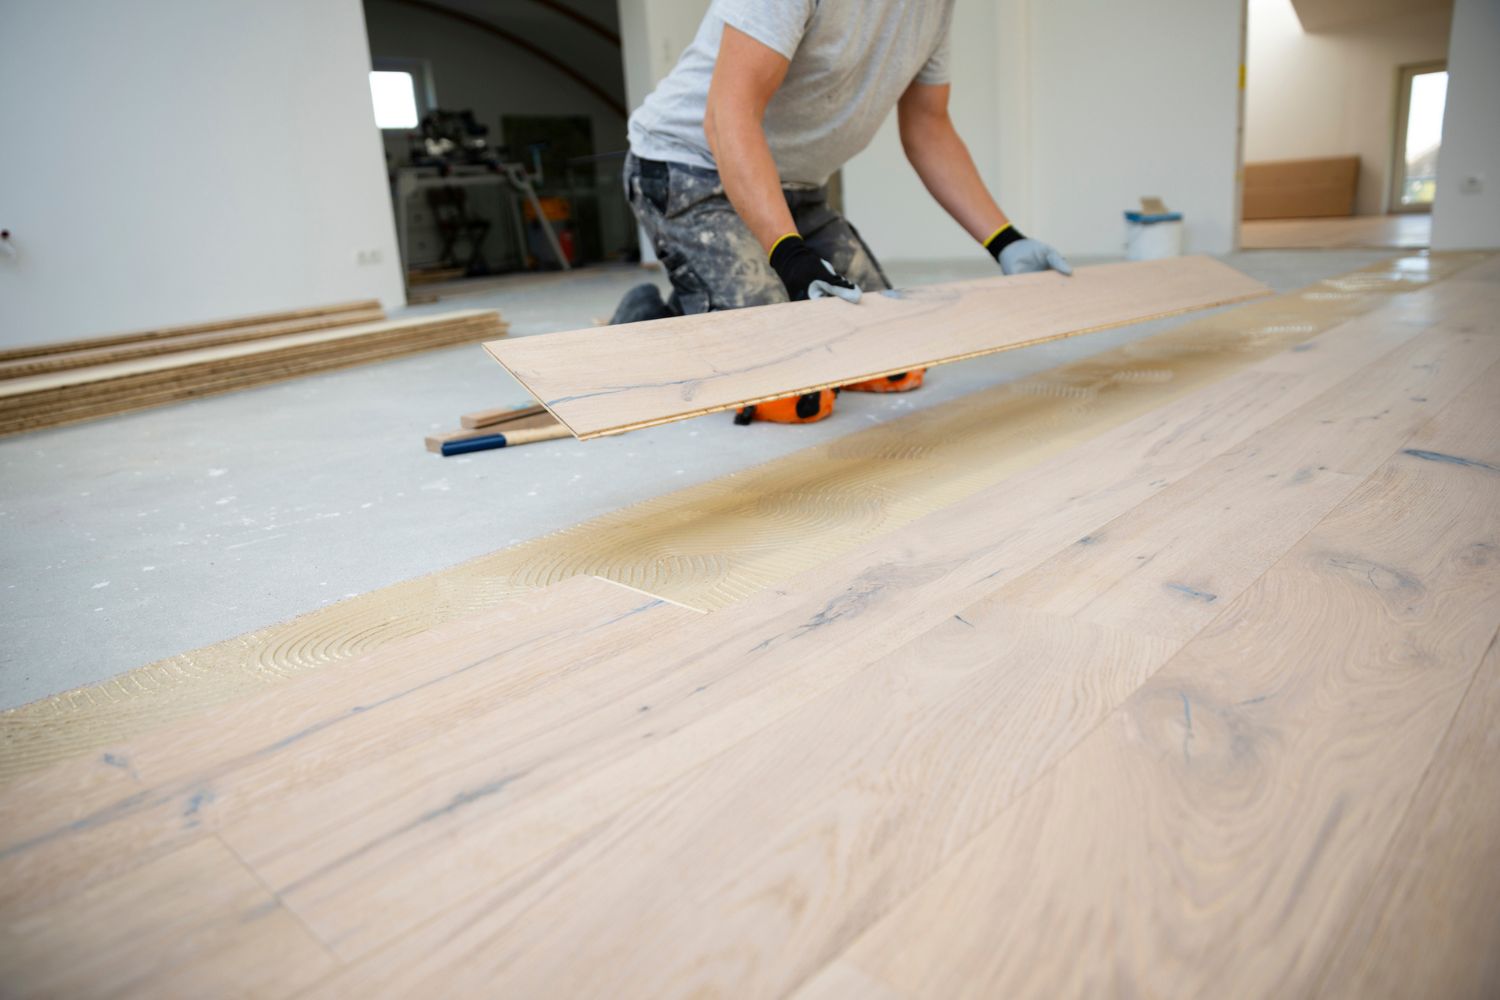 Middle-Aged Man With Grey Hair Laying Down Engineered Wood Floor, Demonstrating the Beautiful Aesthetics and Durability of the Material.